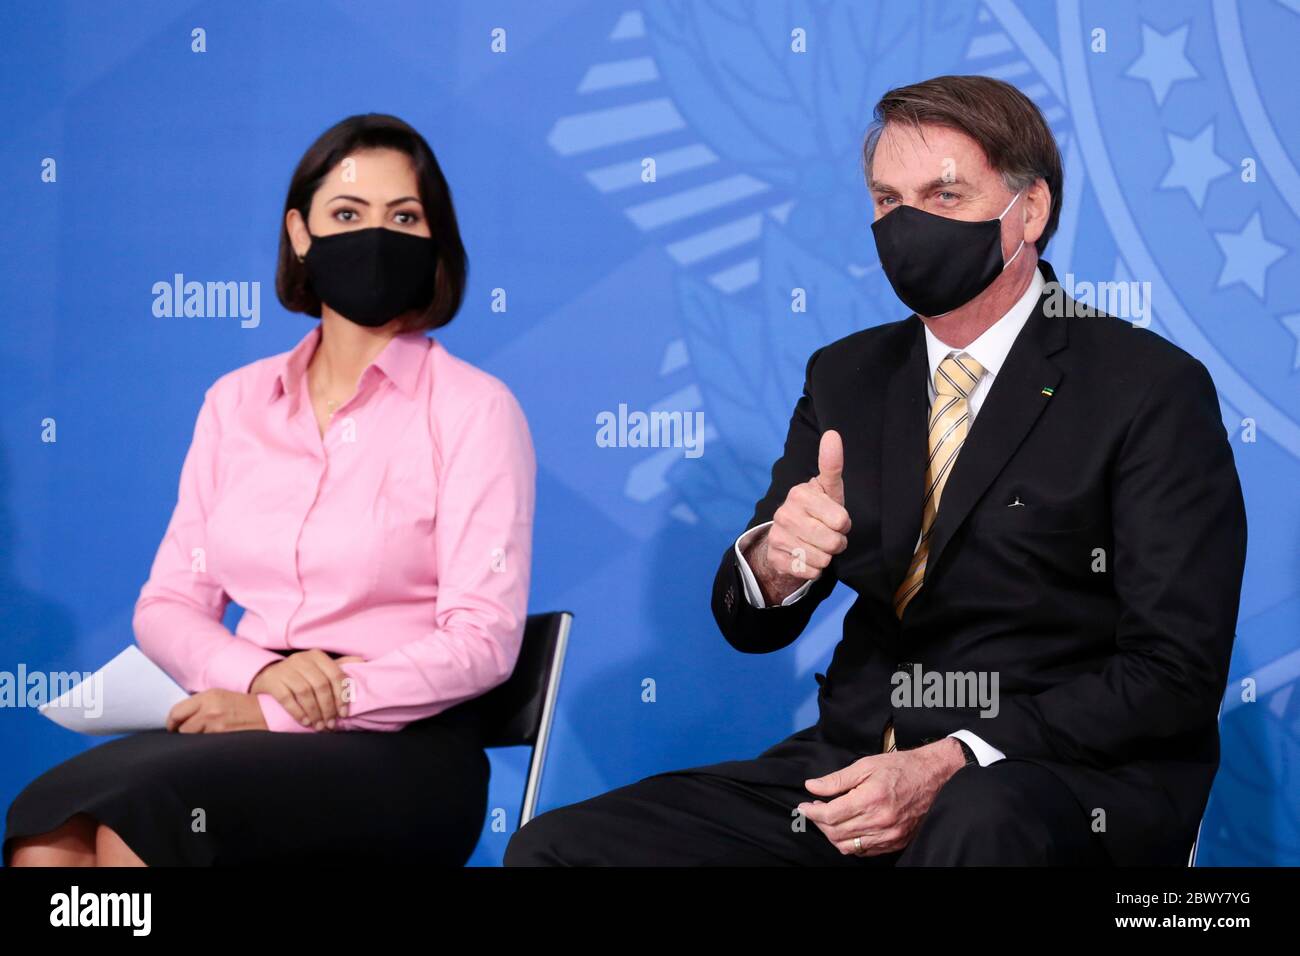 Brazilian President Jair Bolsonaro and first lady Michelle Bolsonaro, both wearing masks amid the COVID-19 pandemic, during an event promoting a government campaign against domestic violence at Planalto presidential palace May 15, 2020 in Brasilia, Brazil. Stock Photo